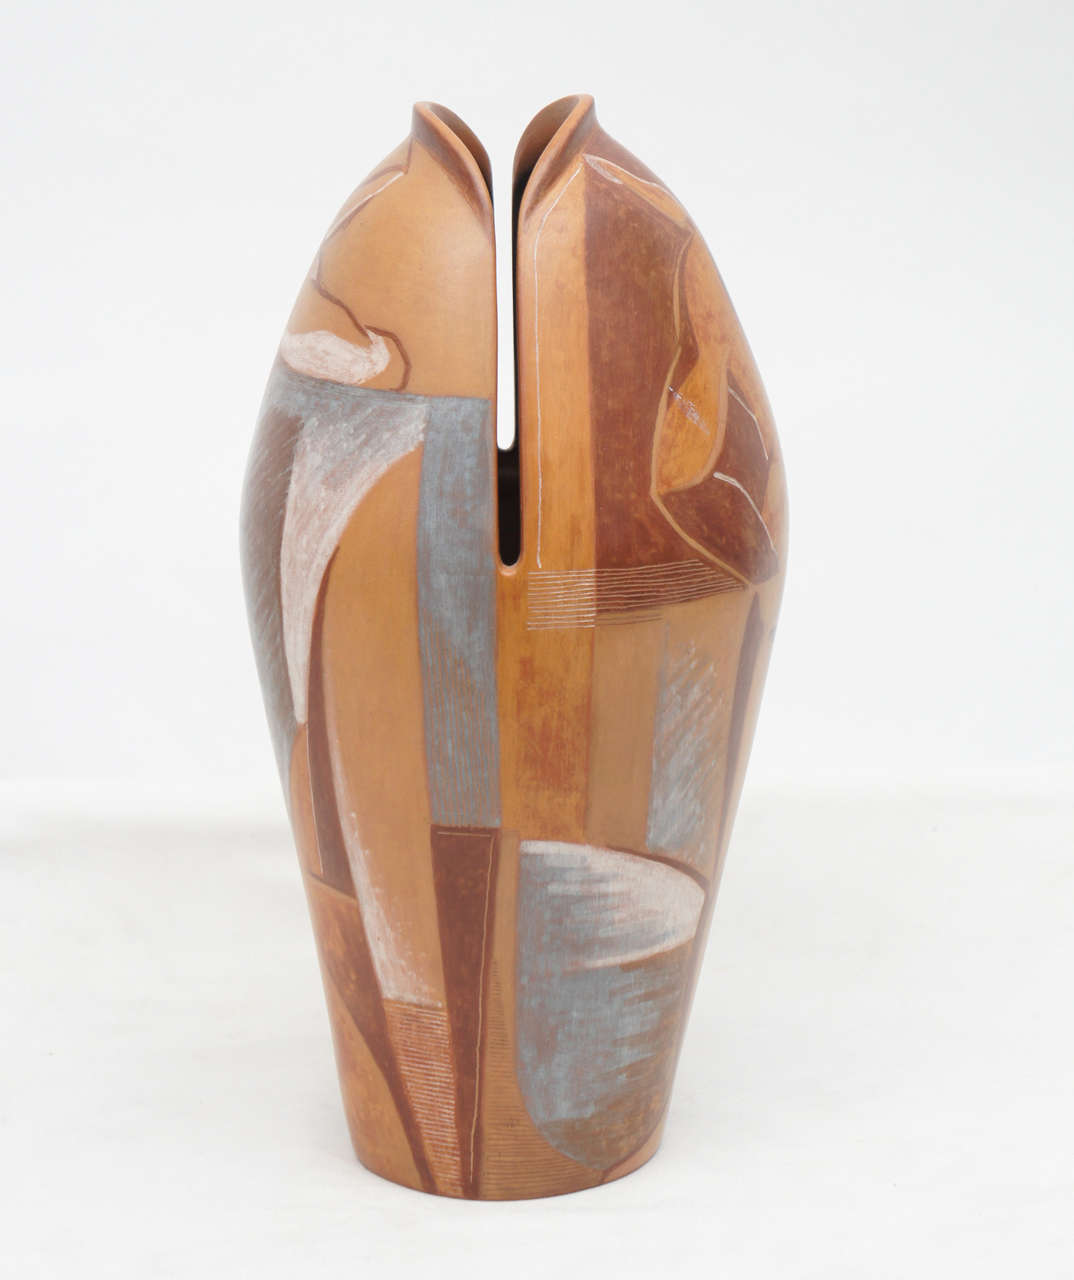 Stunning ceramic vase originally purchased from the Garth Clark Gallery. This unusual piece he the lips of a fish at the mouth, and paintings of men on the body. The abstract designs suggest cubist design, and the beiges, tans, grays and blue colors